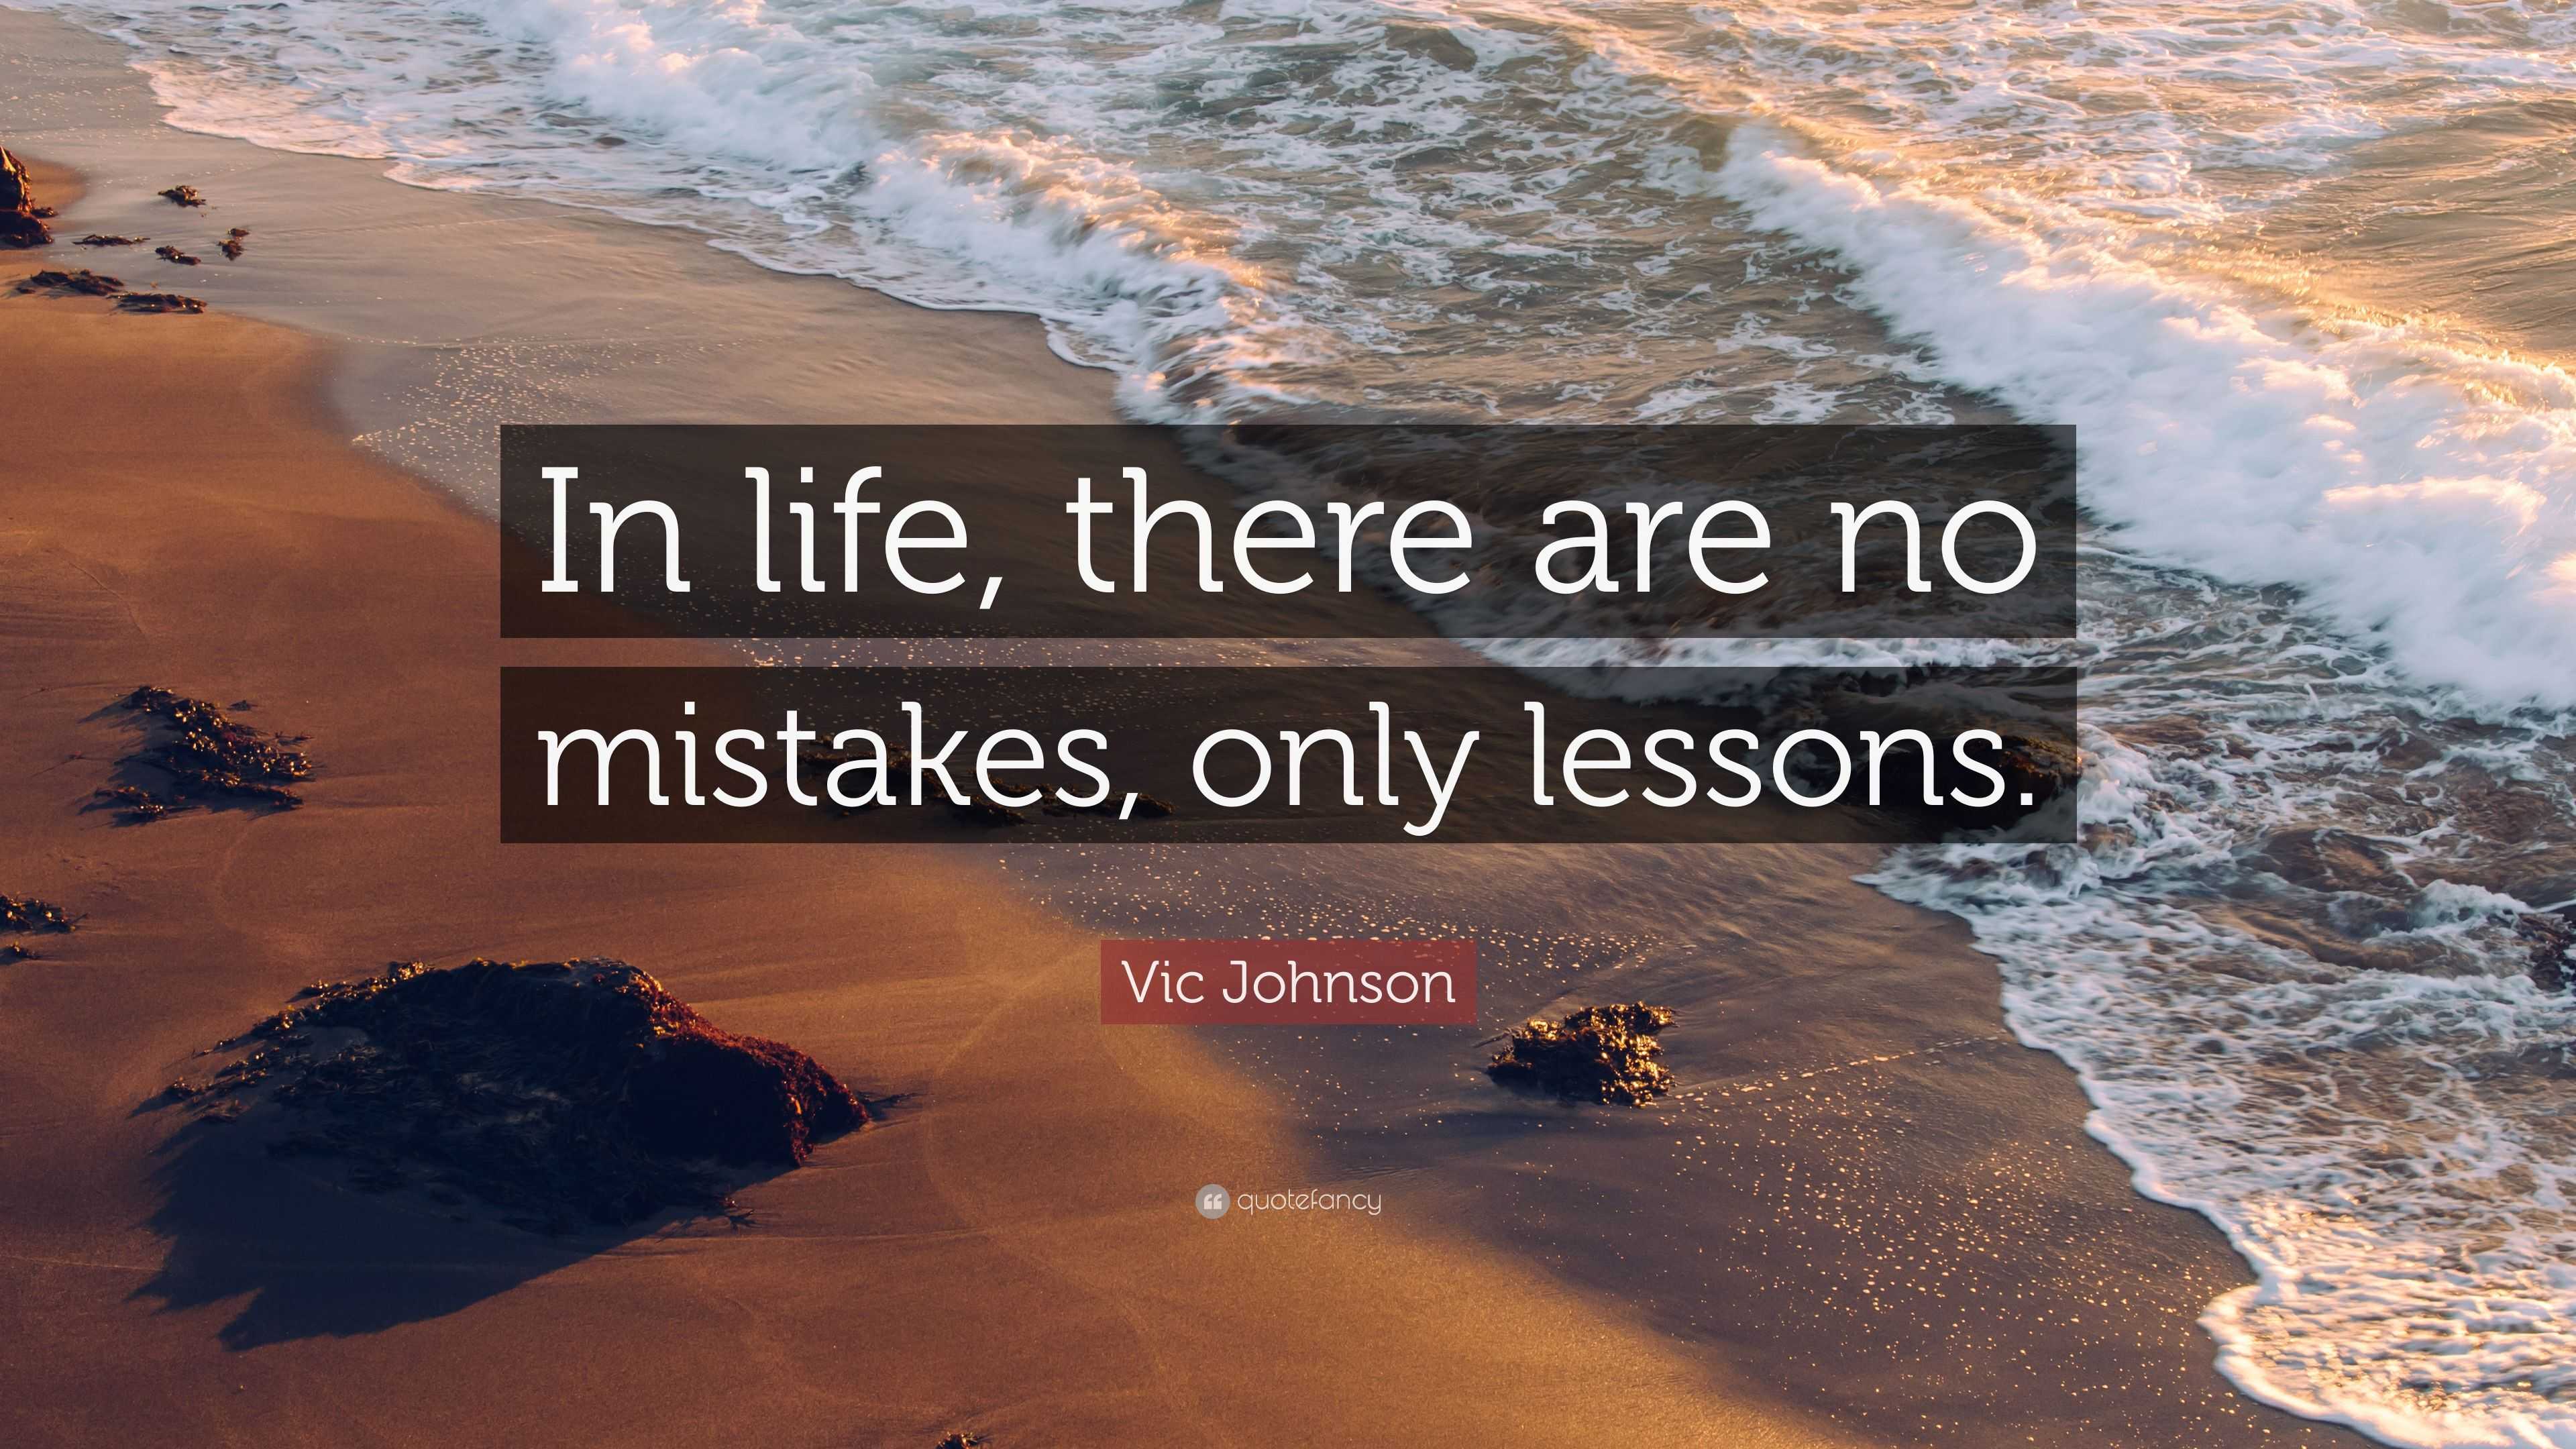 Vic Johnson Quote: “In life, there are no mistakes, only lessons.”